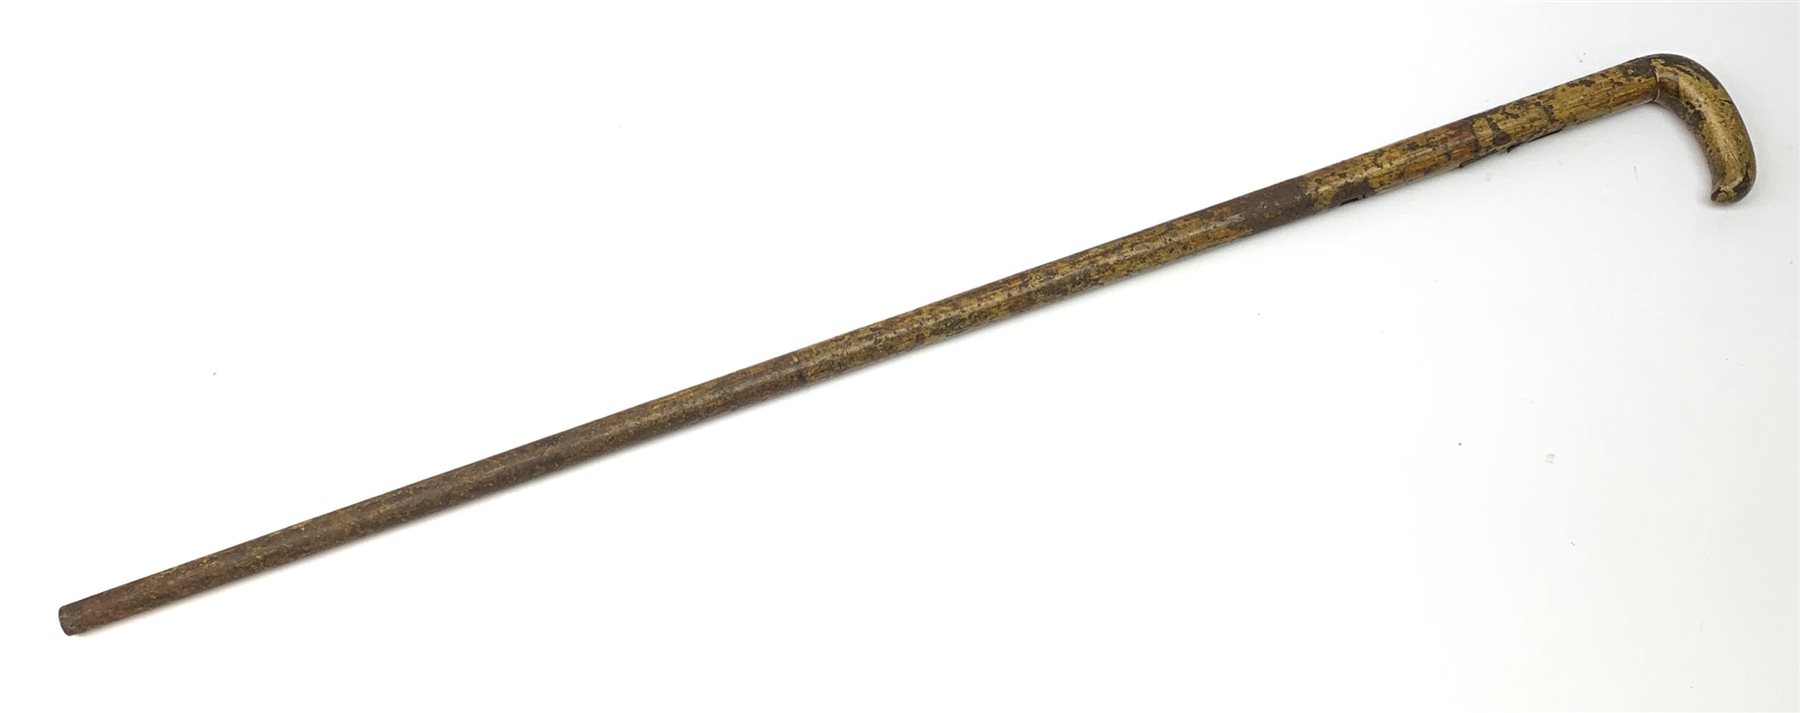 Mid-19th century all steel muzzle loading percussion cap walking stick shotgun, approximate calibre - Image 2 of 5